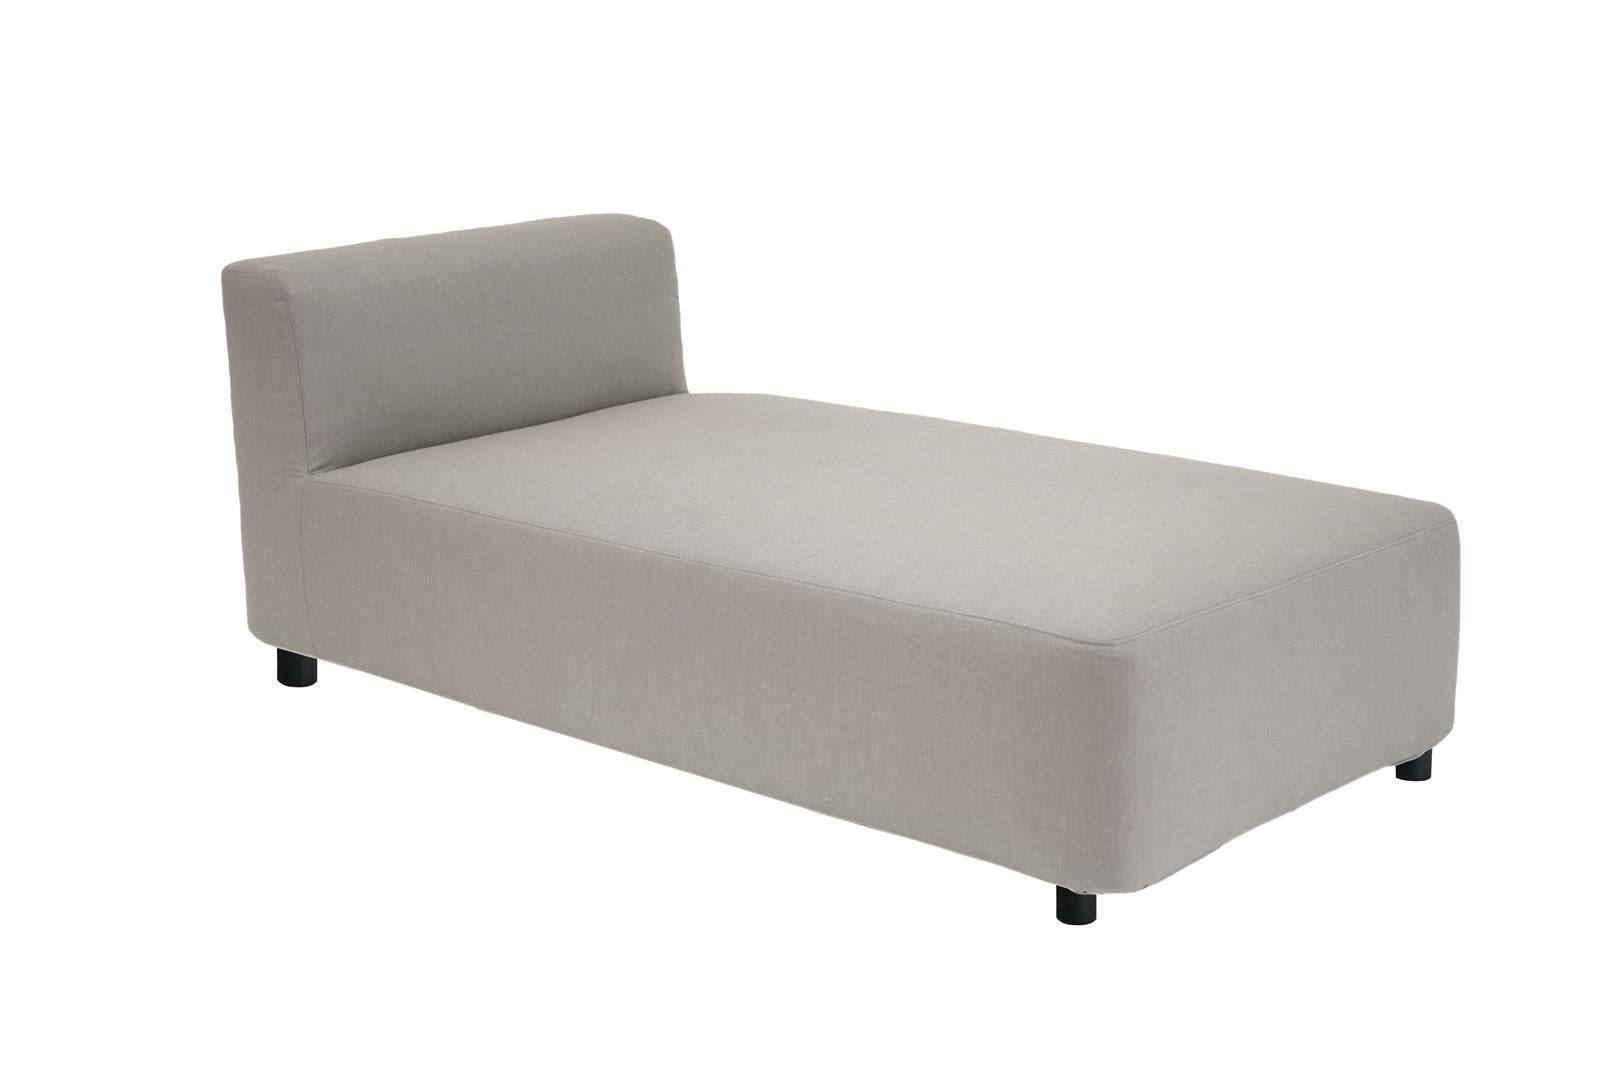 Mare Daybed S 90 x 200 cm